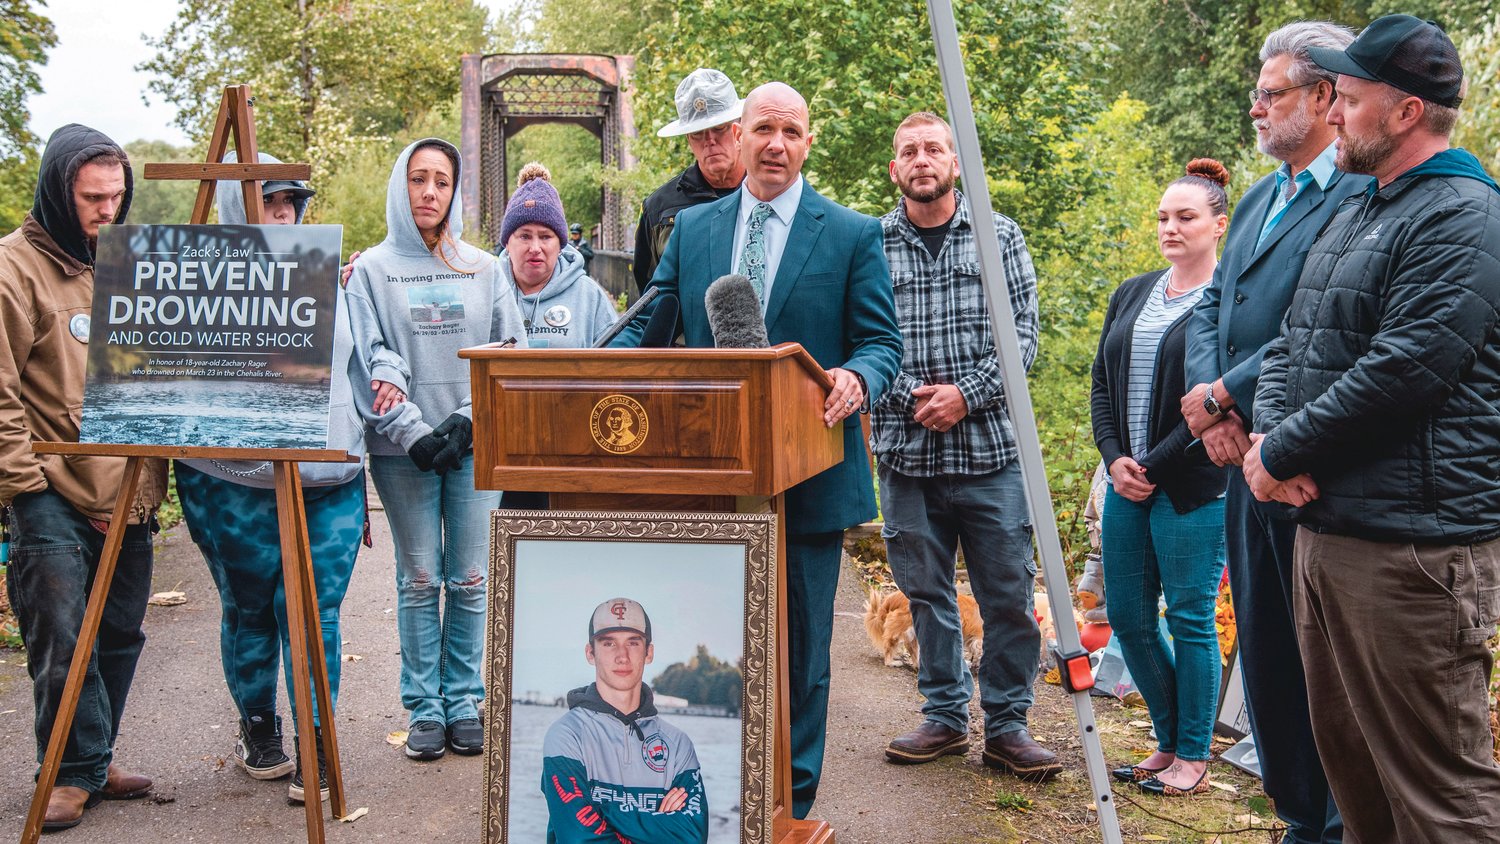 Peter Abbarno said “Zack’s Law will save lives,” during an event honoring the life of Zack Hines-Rager with a goal of raising awareness around cold water shock to prevent drownings.